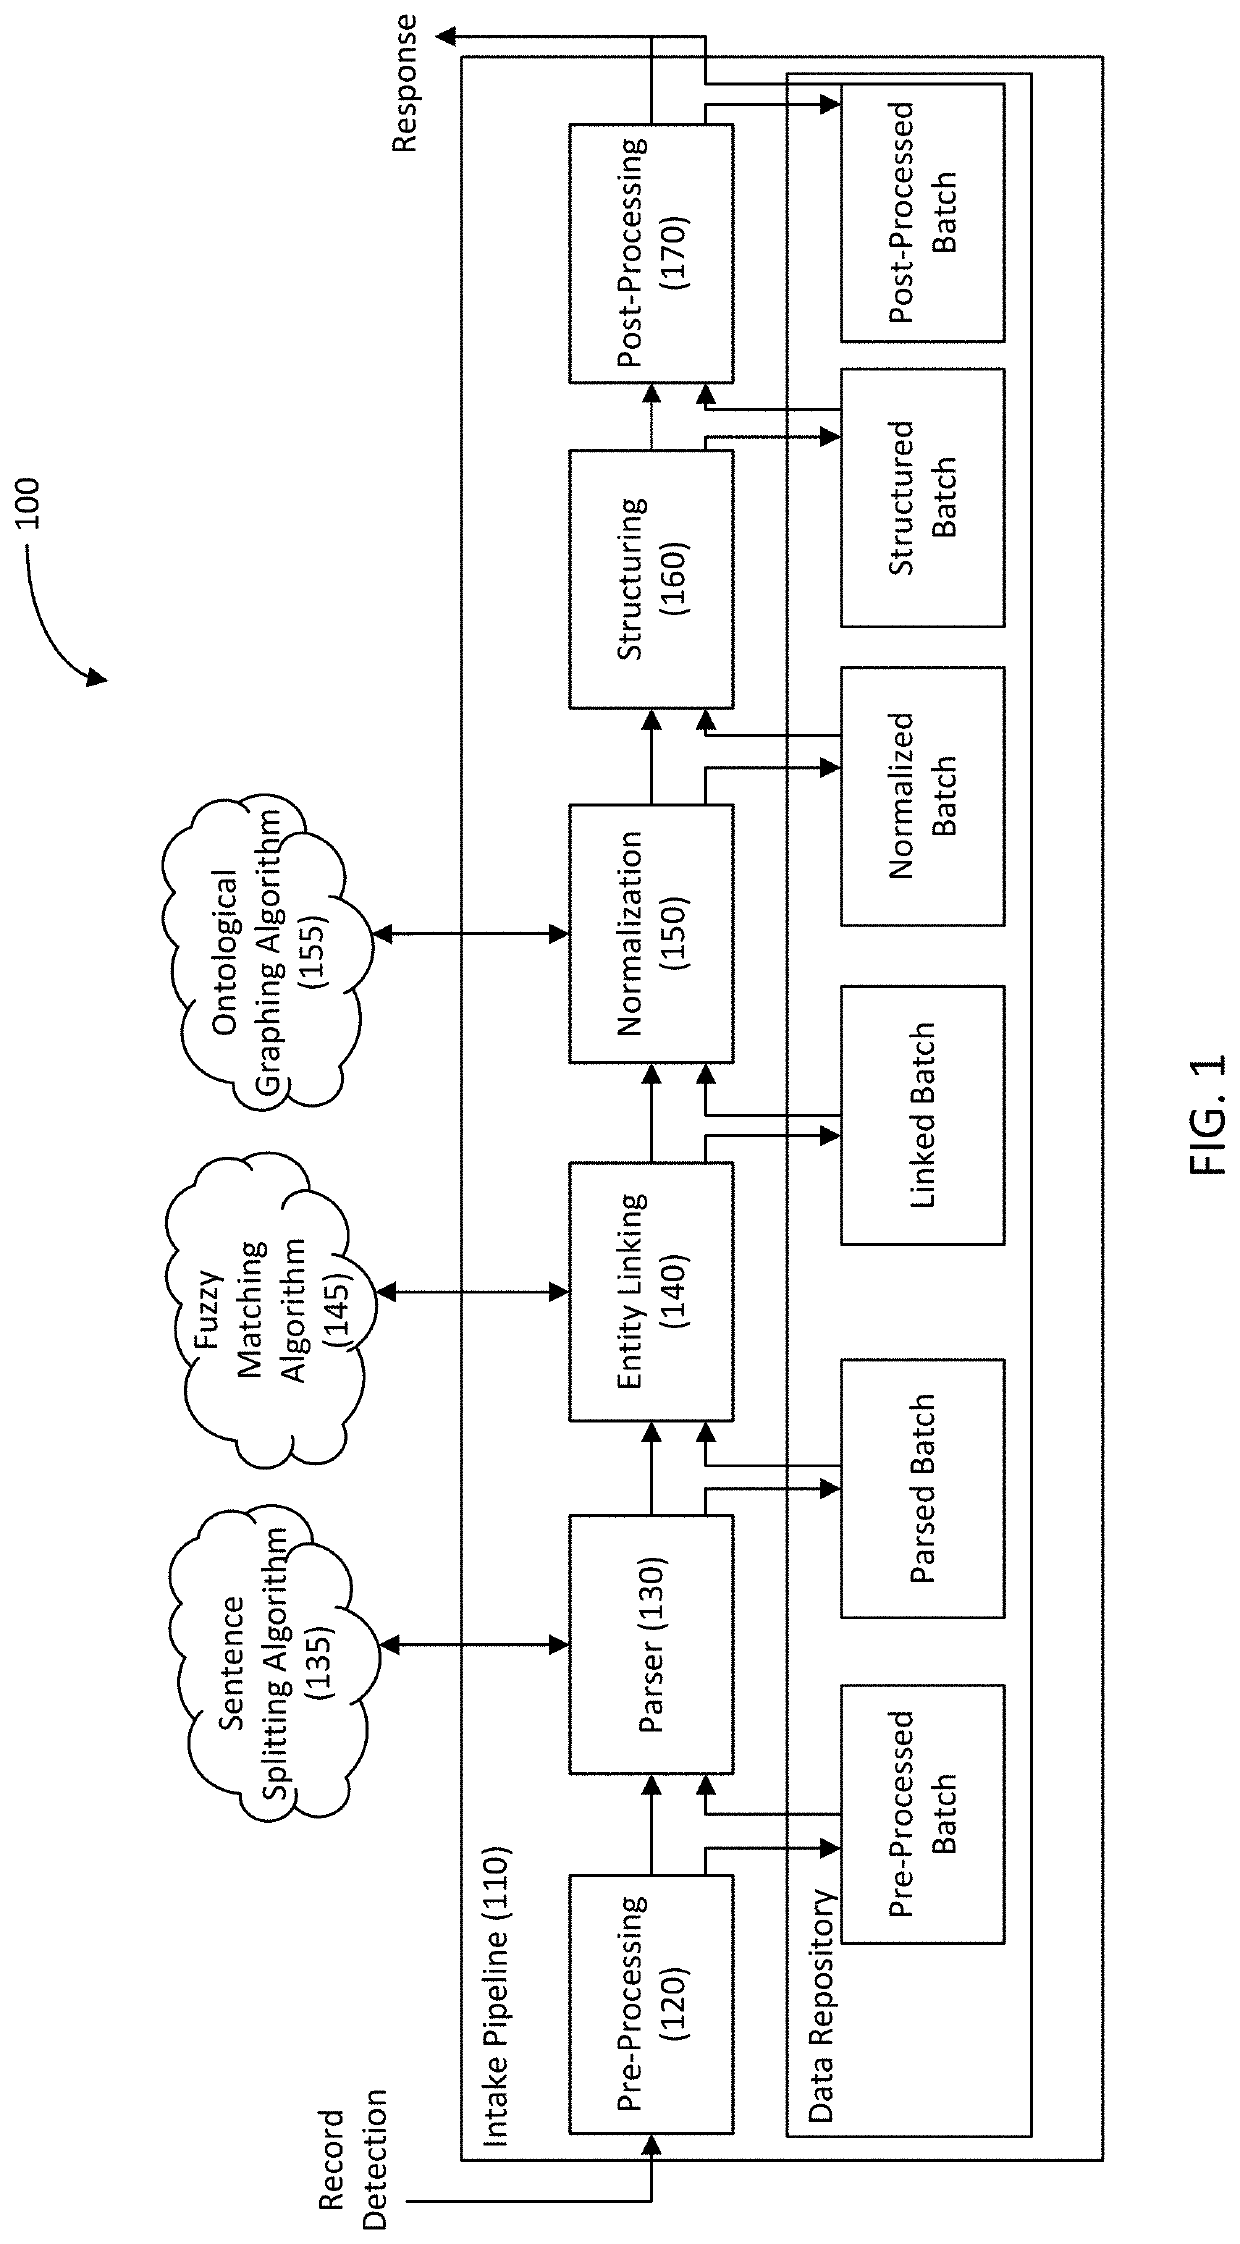 Clinical Concept Identification, Extraction, and Prediction System and Related Methods